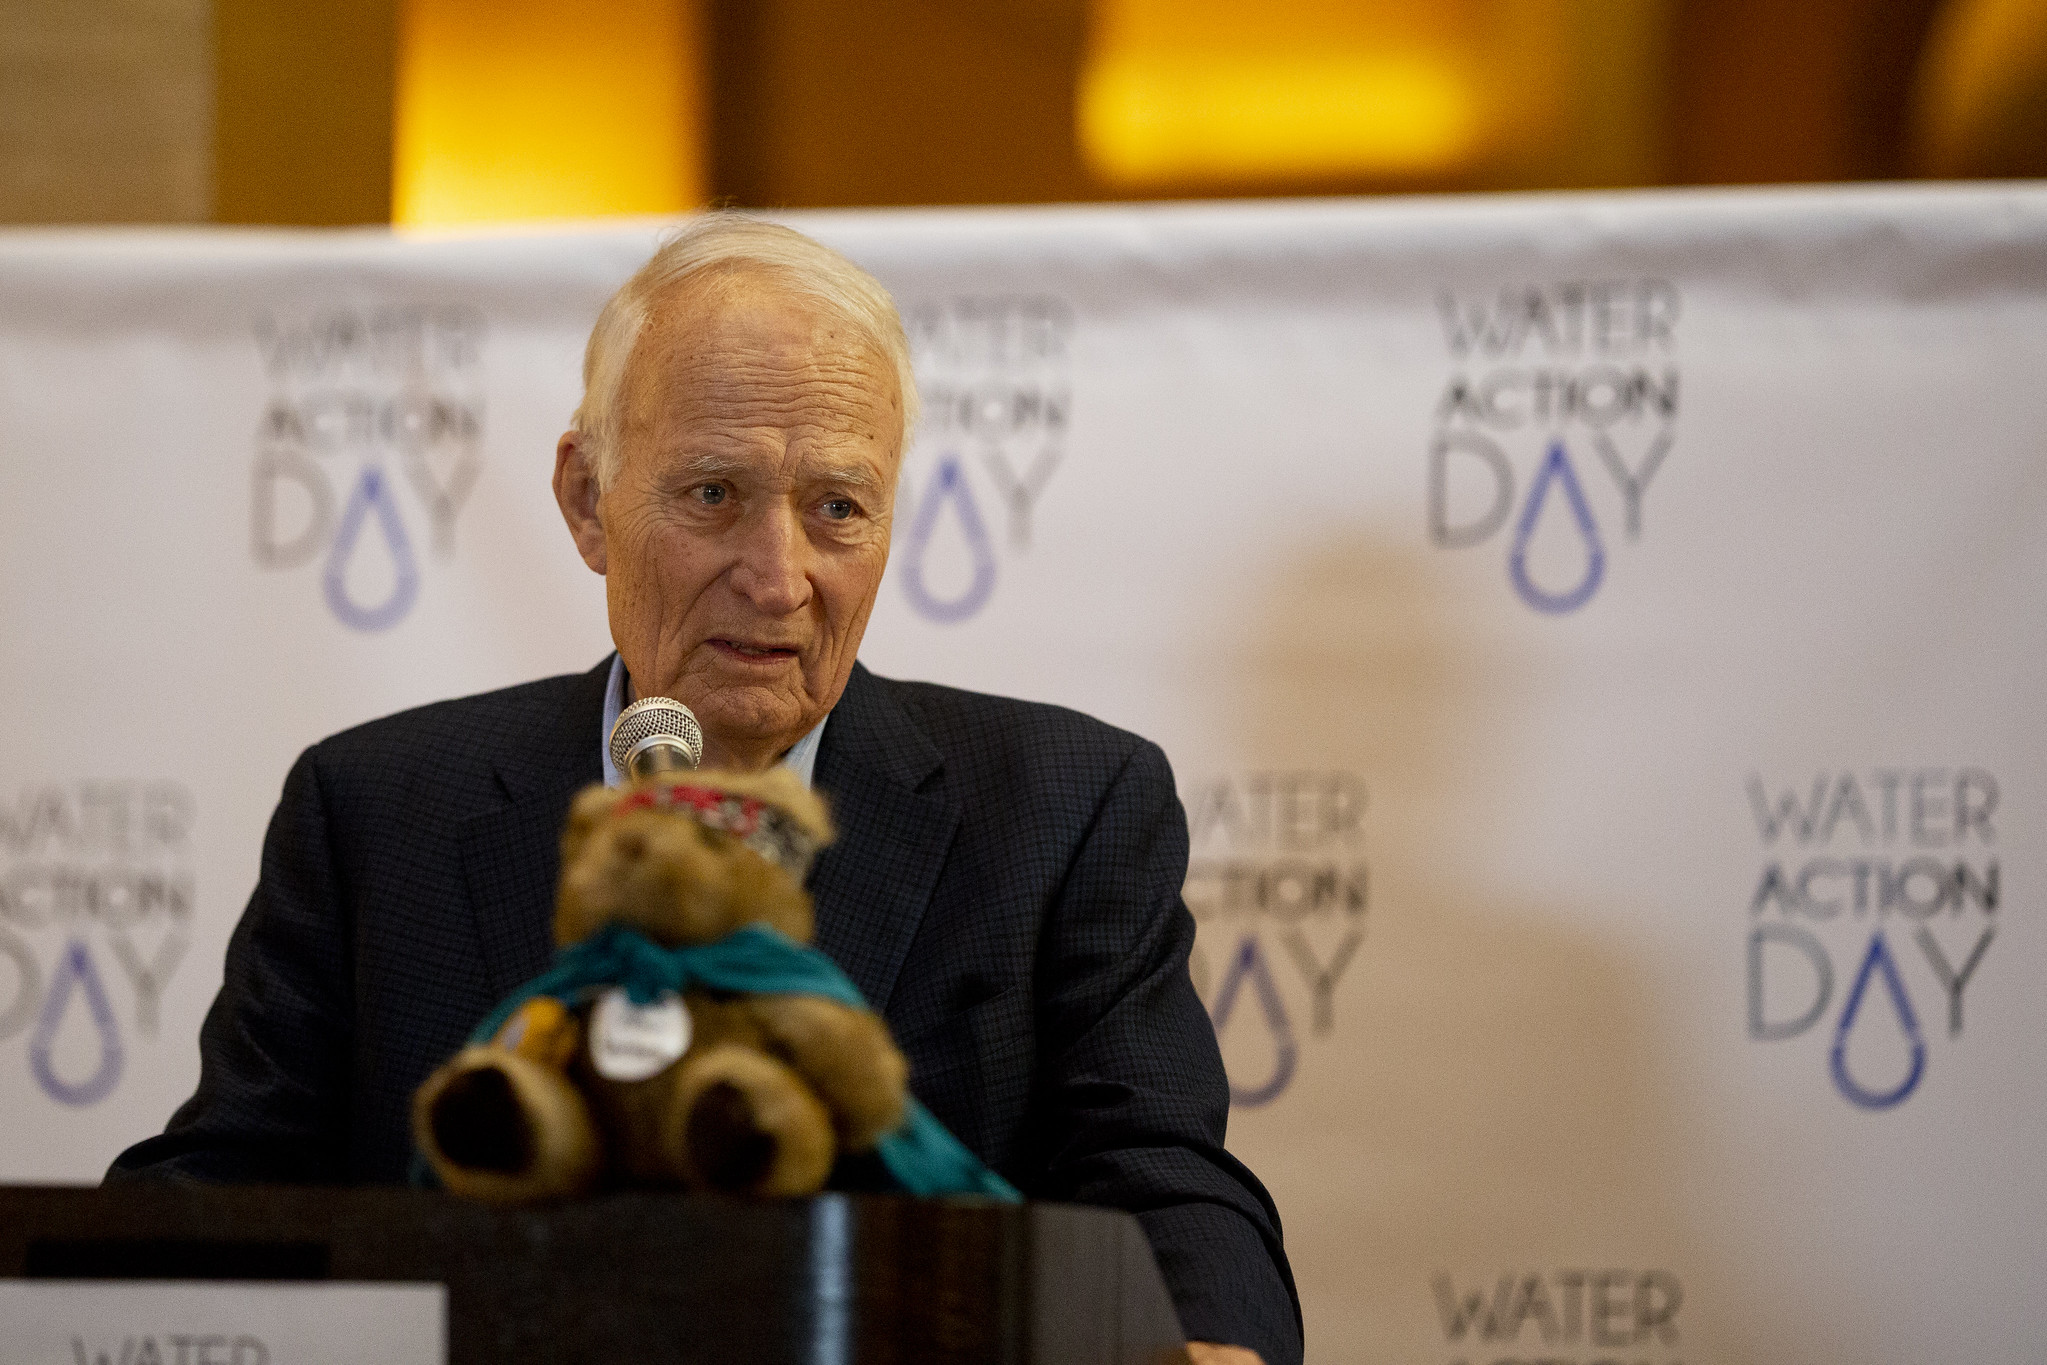 David Durenberger, in a suit and speaking behind a microphone at Water Action Day at the Minnesota Capitol rotunda in 2018. 